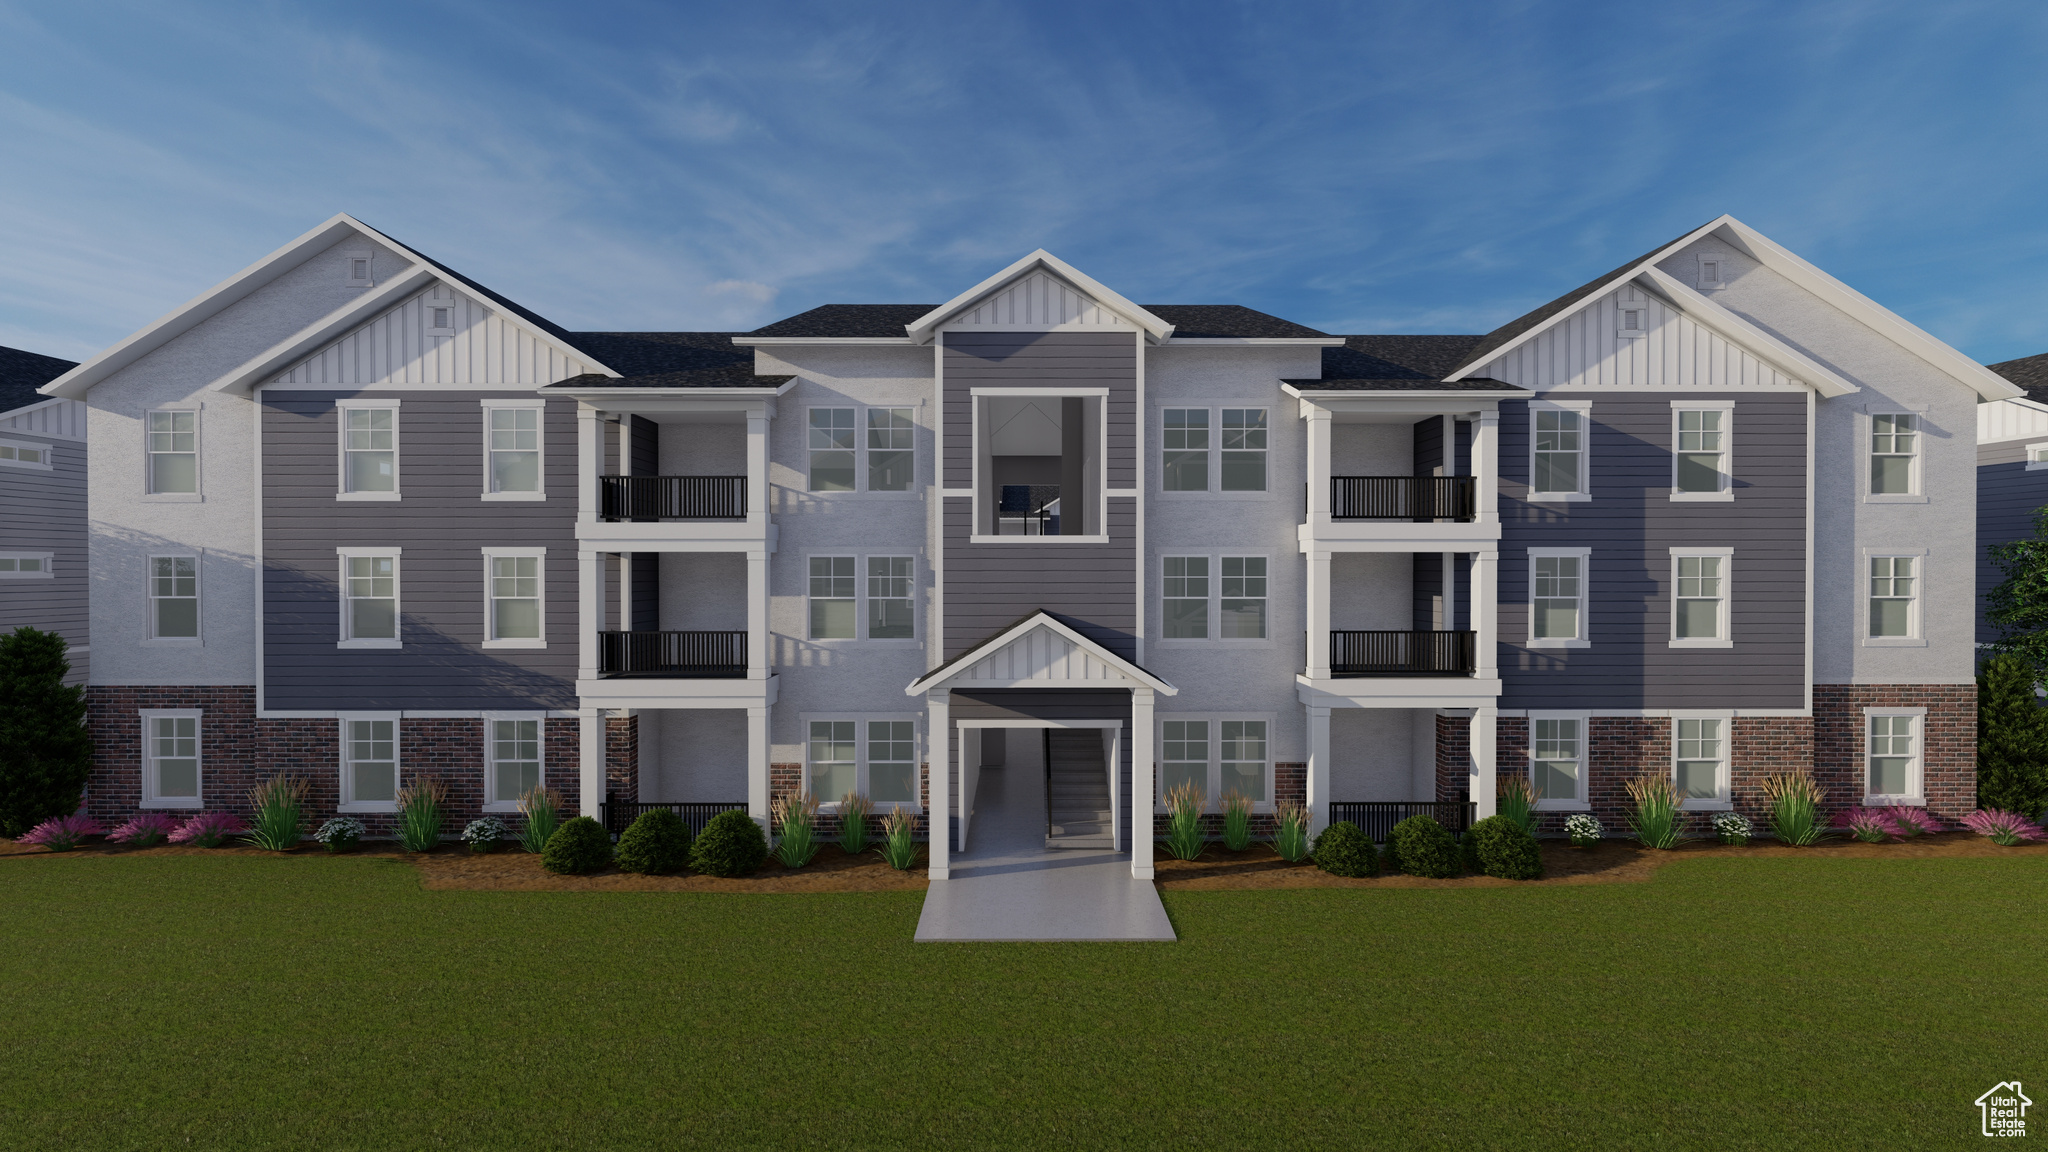 Townhome / multi-family property featuring a front lawn and a balcony